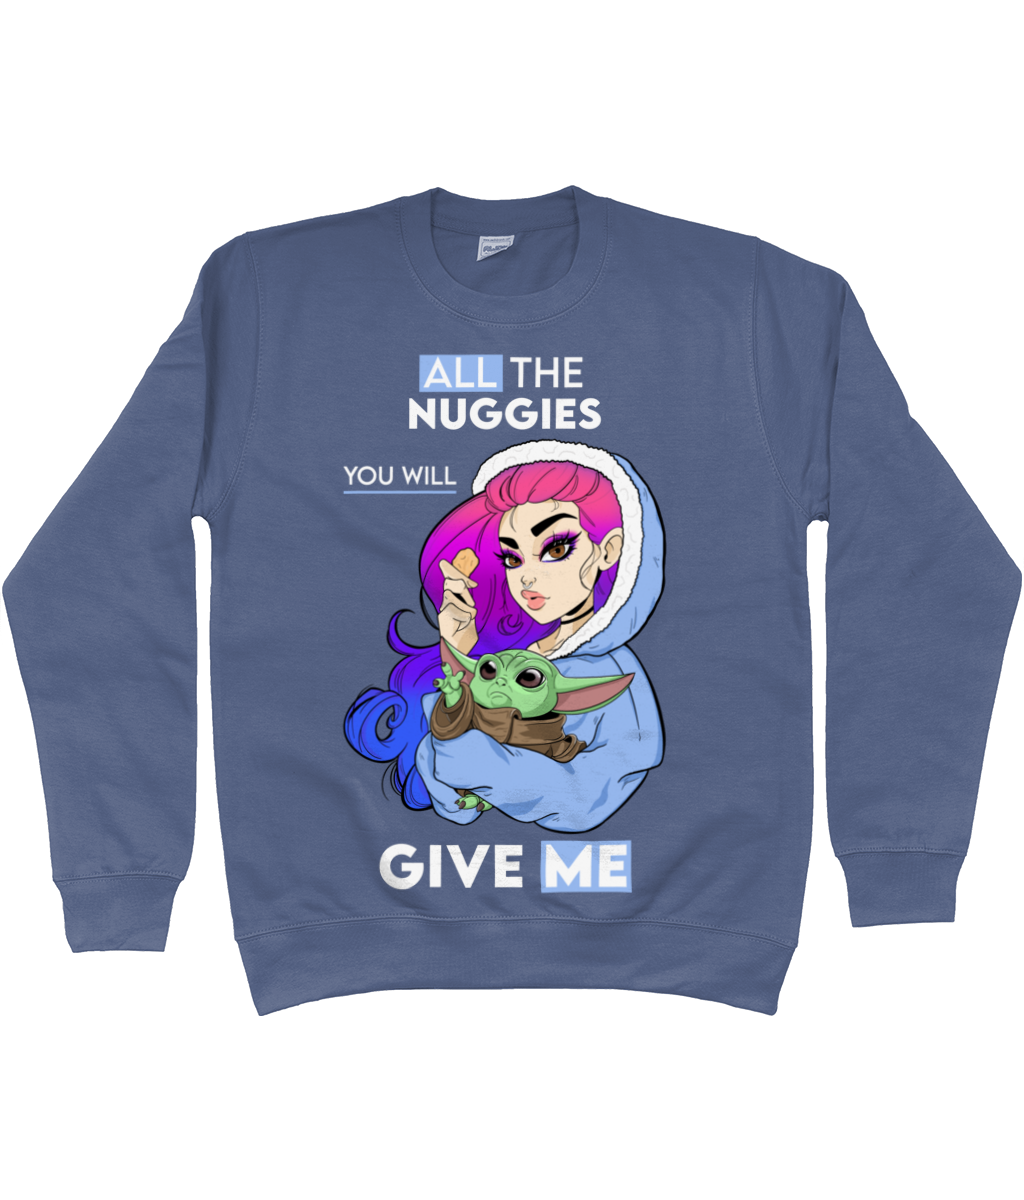 Pixie Cake Face 'All The Nuggies' Sweatshirt